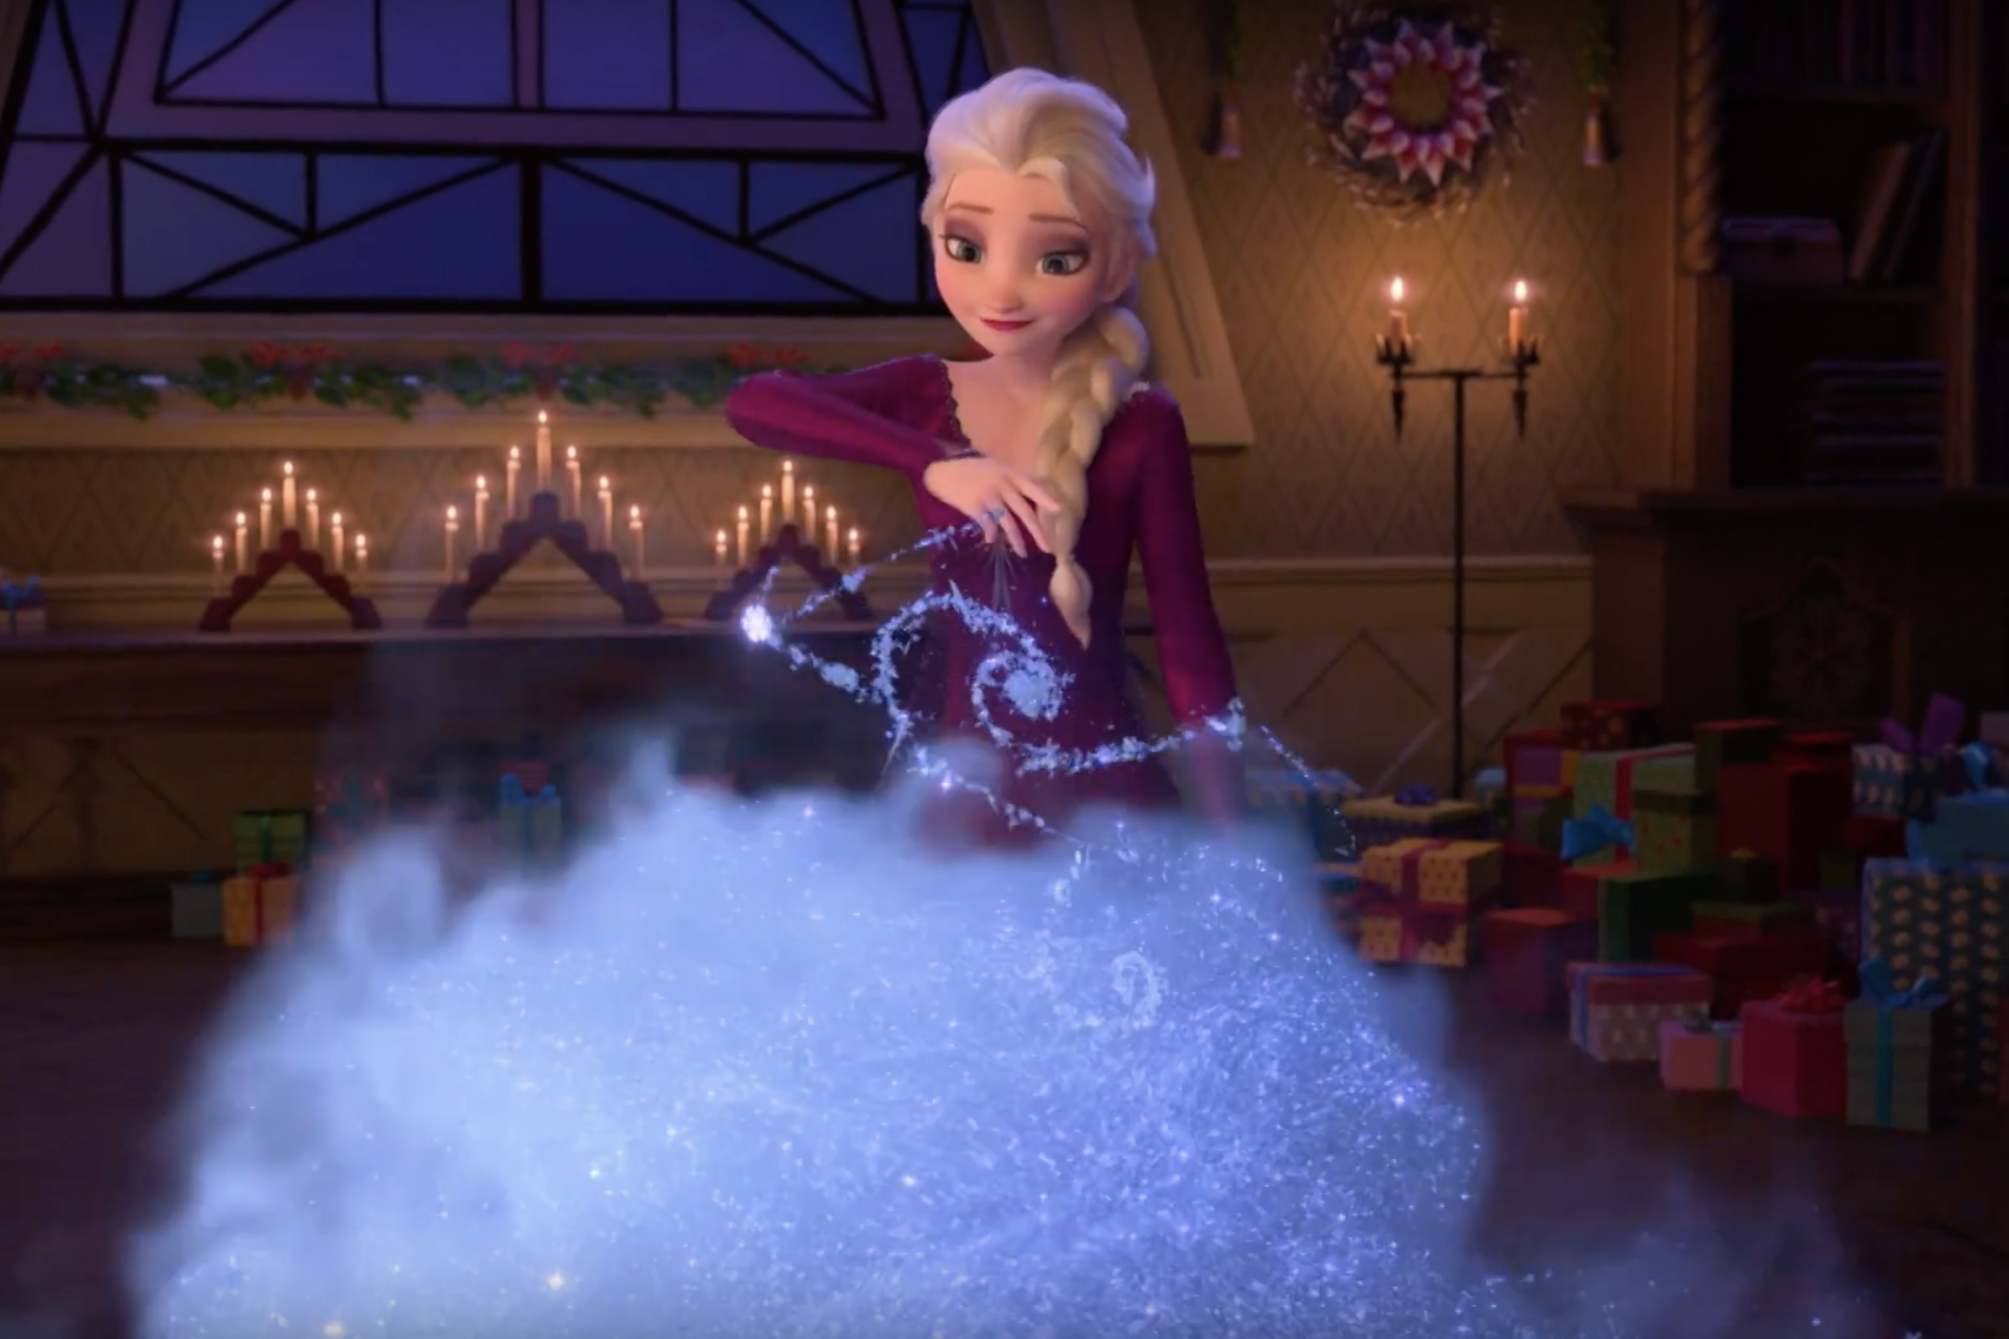 ‘Frozen’ was the highest-grossing animated film until 2019 (Iceland/Disney)